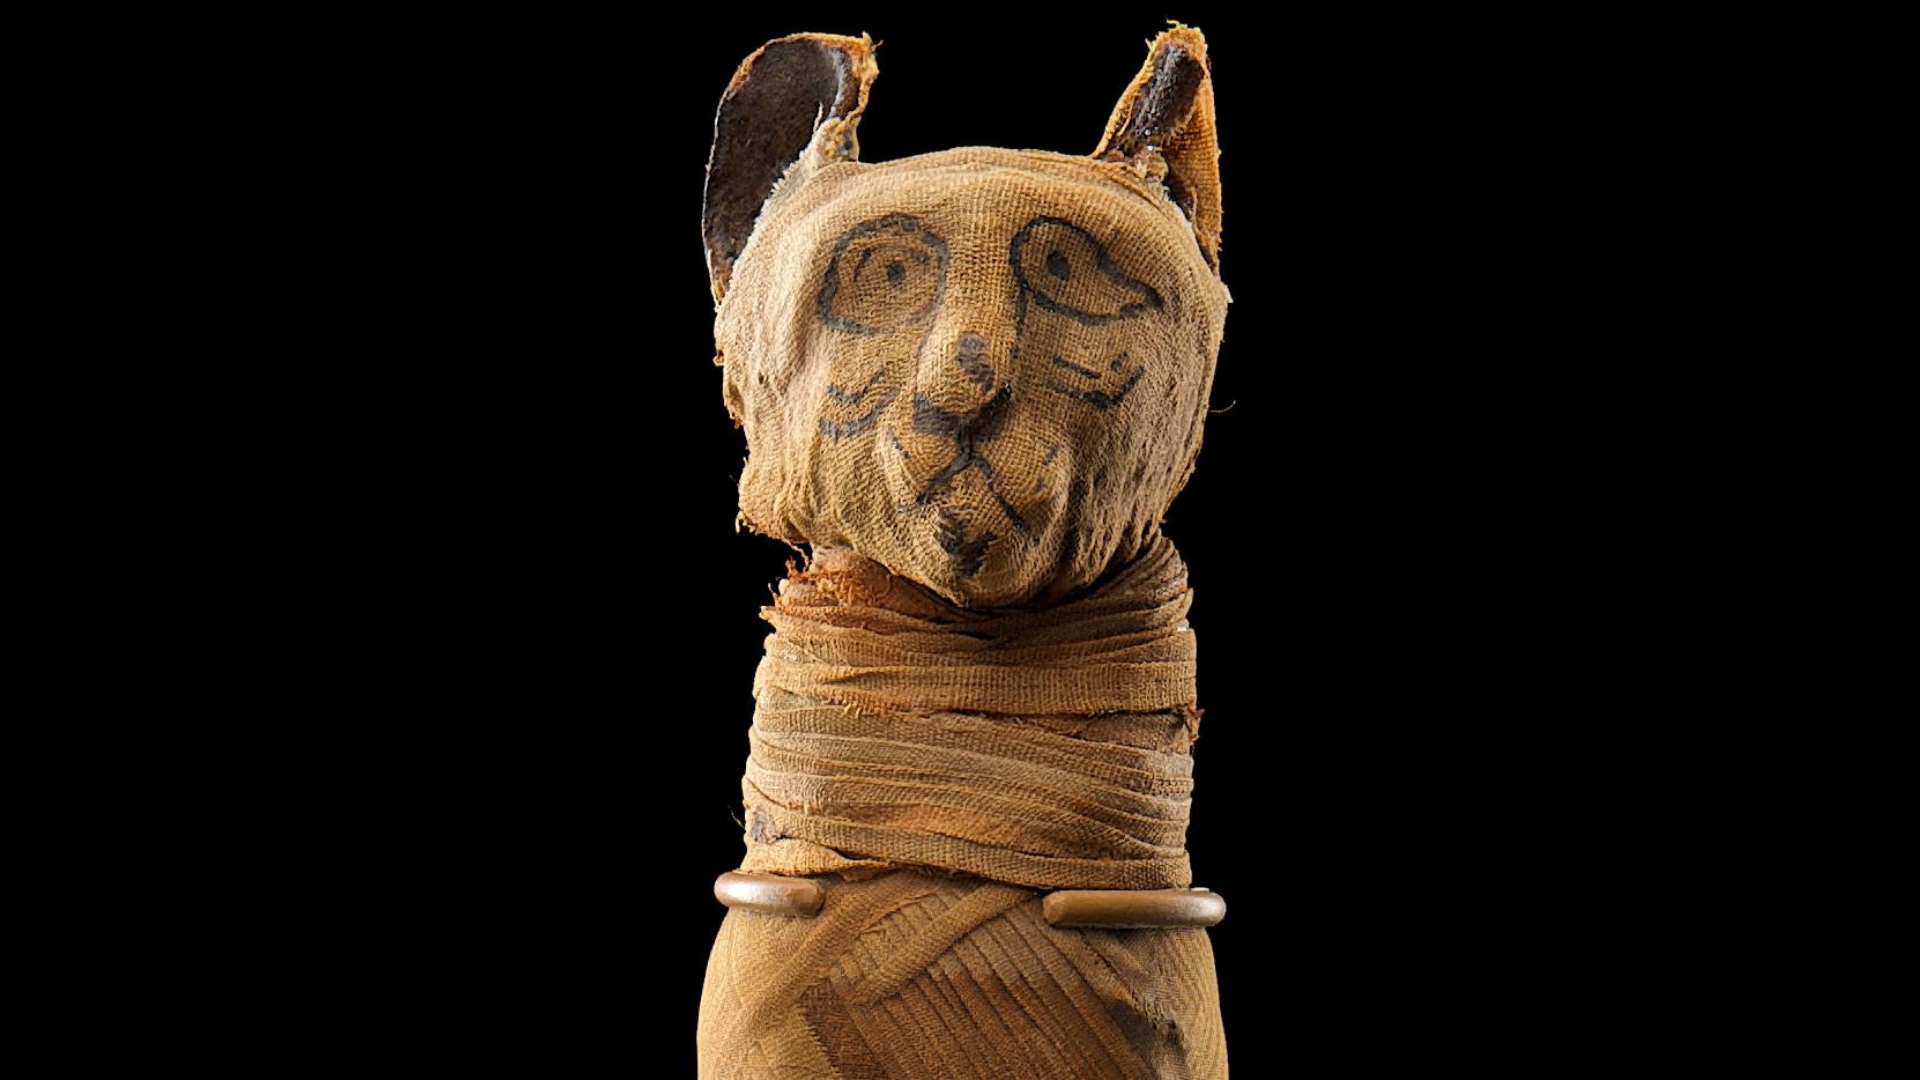 Image of mummified cat from Mummies of the World: Exhibition featured at the Discovery Center of Idaho.